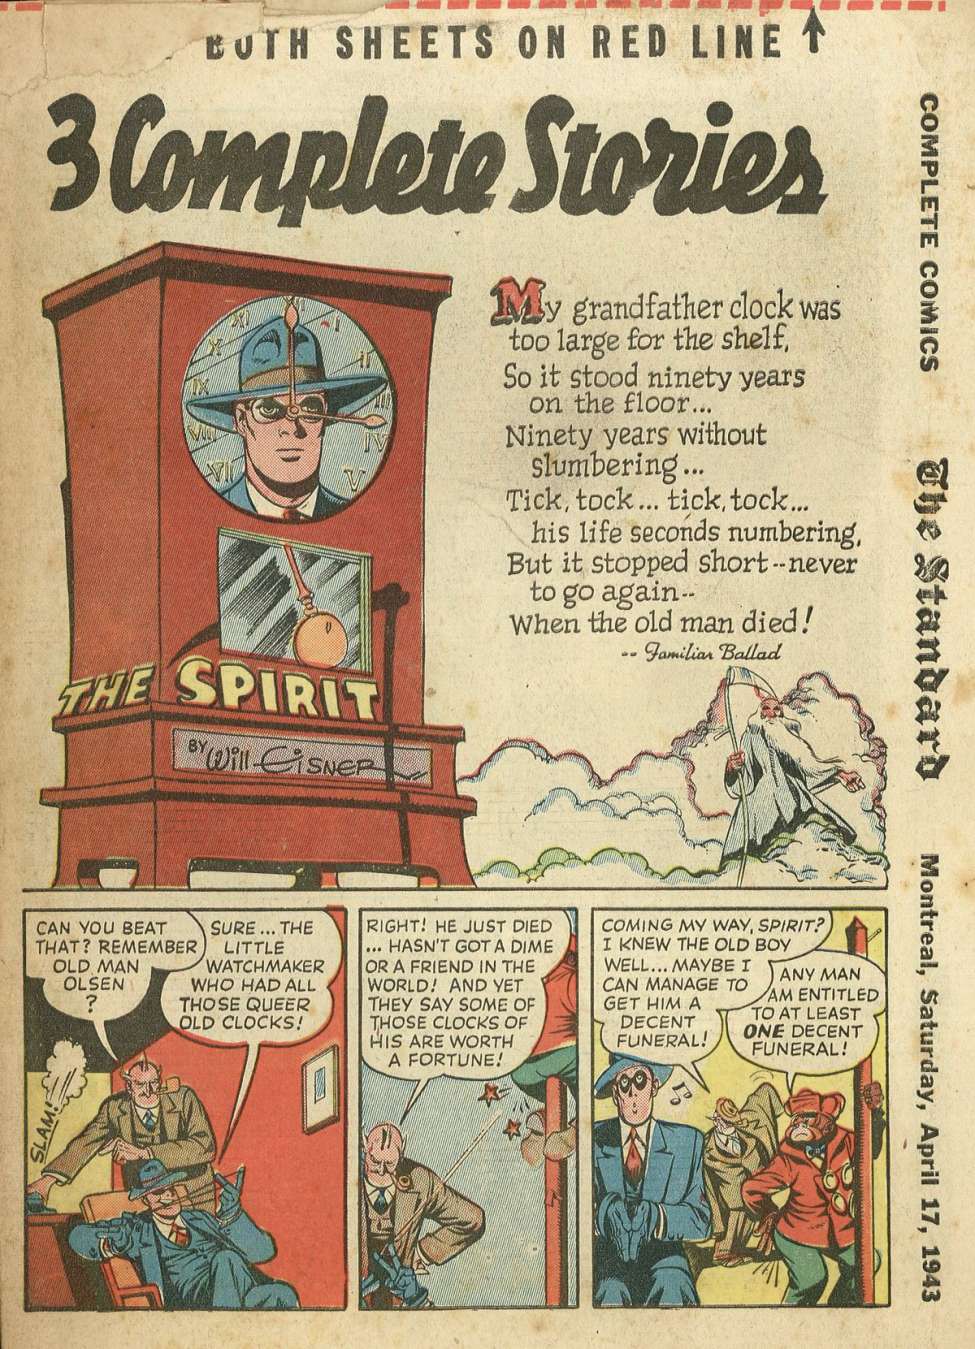 Book Cover For The Spirit (1943-04-17) - Montreal Standard